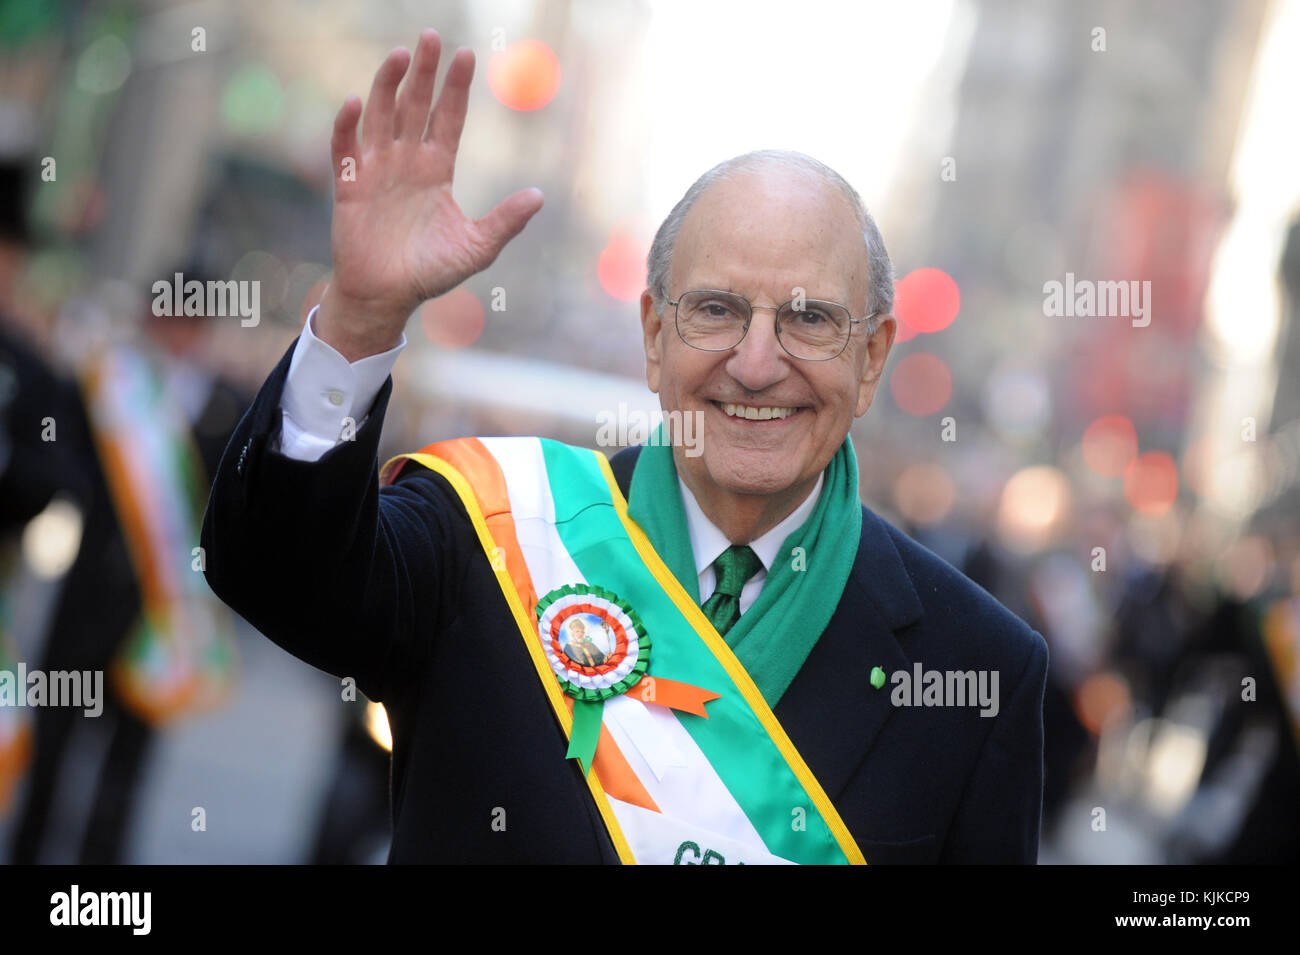 NEW YORK, NY - MARCH 17: Grand Marshal George Mitchell  marches in the annual St. Patrick's Day parade, one of the largest and oldest in the world on March 17, 2016 in New York City. Now that a ban on openly gay groups has been dropped, Mayor de Blasio is attending the parade for the first time since he became mayor in 2014. The parade goes up Fifth Avenue ending at East 79th Street and will draw an estimated 2 million spectators along its 35-block stretch   People:  Grand Marshal George Mitchell Stock Photo